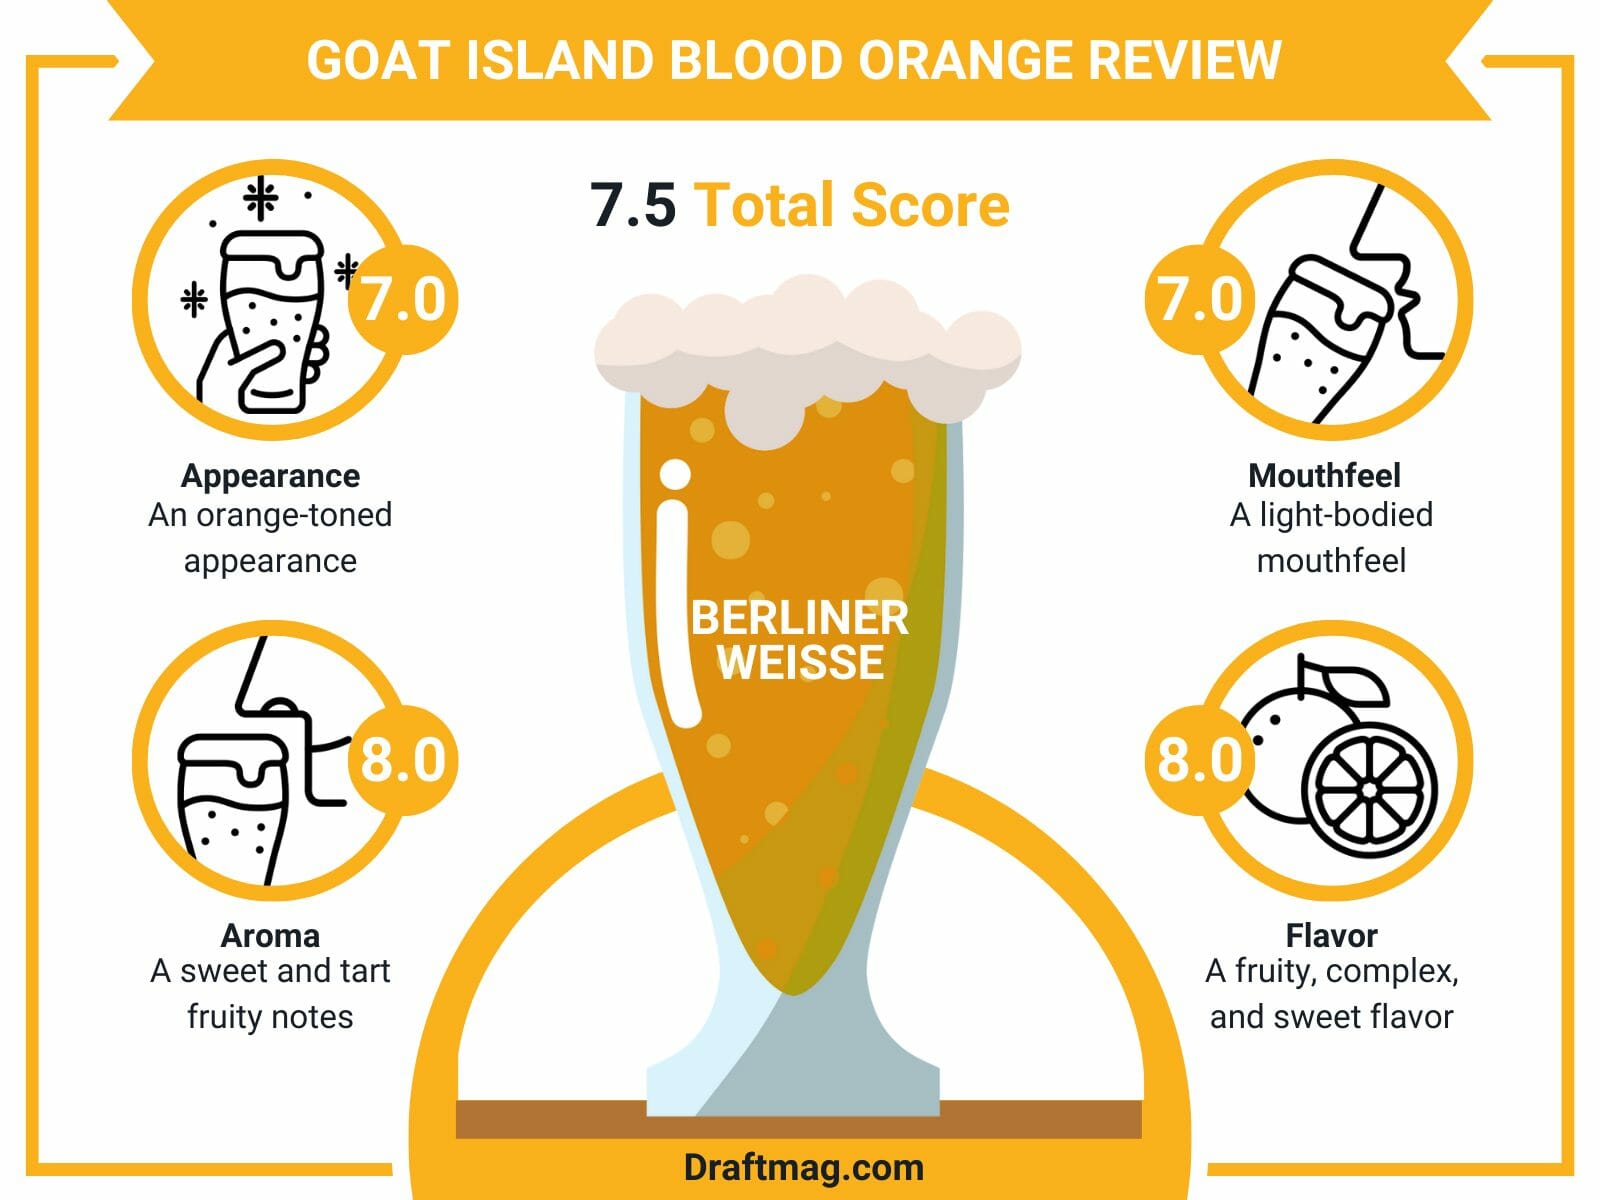 Goat island blood orange review infographic